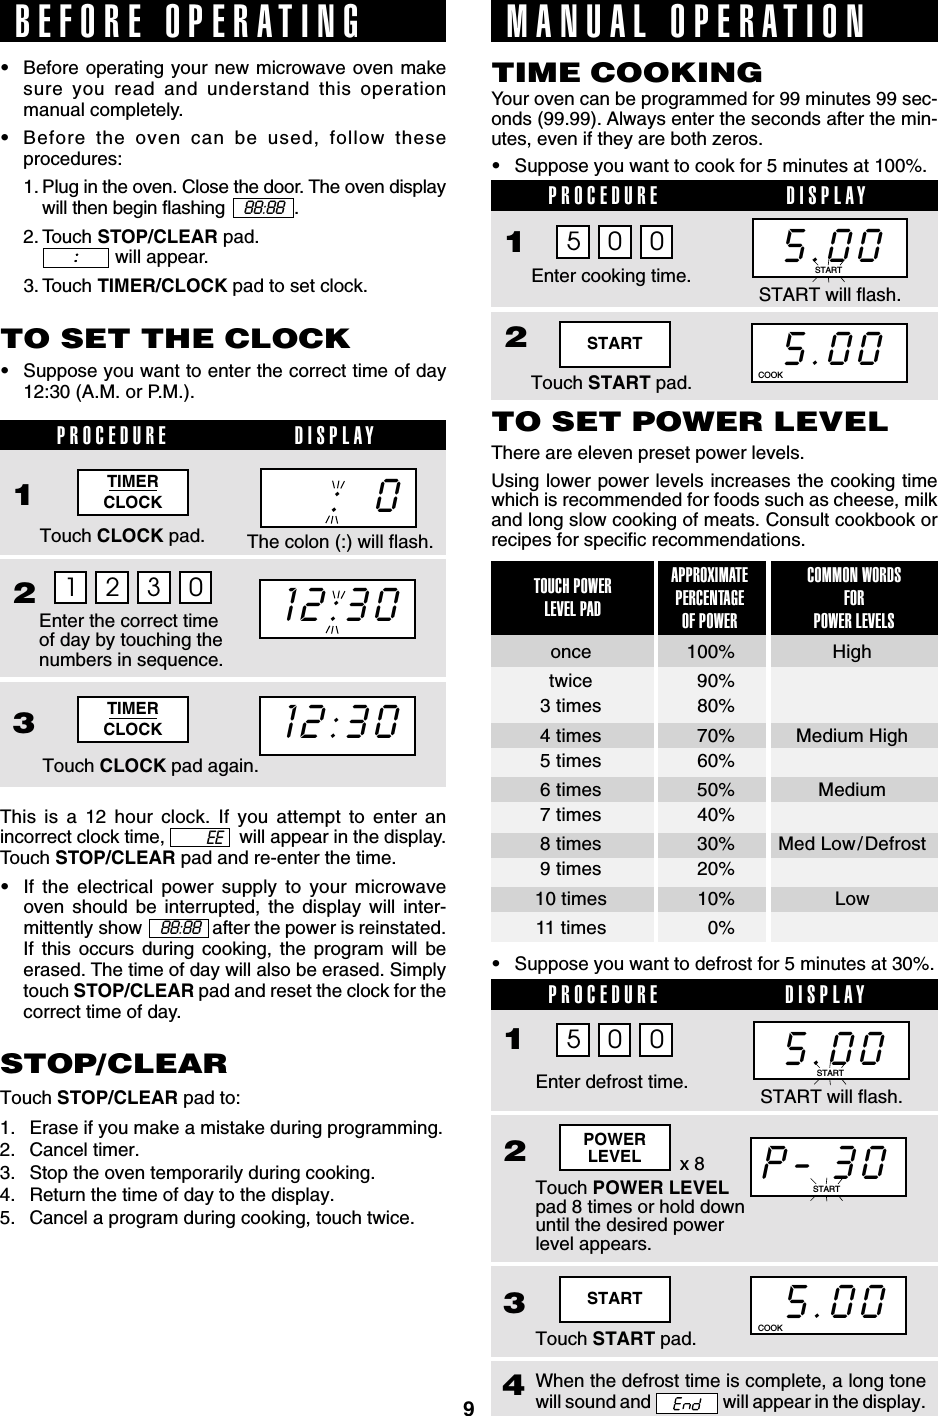 9STARTTouch START pad.25.00COOKSTARTTIMERCLOCKTIMERCLOCK5.00This is a 12 hour clock. If you attempt to enter anincorrect clock time,               will appear in the display.Touch STOP/CLEAR pad and re-enter the time.•If the electrical power supply to your microwaveoven should be interrupted, the display will inter-mittently show      88:88   after the power is reinstated.If this occurs during cooking, the program will beerased. The time of day will also be erased. Simplytouch STOP/CLEAR pad and reset the clock for thecorrect time of day.The colon (:) will flash.12:30:  0BEFORE OPERATING•Before operating your new microwave oven makesure you read and understand this operationmanual completely.•Before the oven can be used, follow theseprocedures:1. Plug in the oven. Close the door. The oven displaywill then begin flashing     88:88   .2. Touch STOP/CLEAR pad.              will appear.3. Touch TIMER/CLOCK pad to set clock.:::::TO SET THE CLOCK•Suppose you want to enter the correct time of day12:30 (A.M. or P.M.).1 2 3 0PROCEDURE DISPLAY1Touch CLOCK pad.Enter the correct timeof day by touching thenumbers in sequence.23Touch CLOCK pad again.12:30STOP/CLEARTouch STOP/CLEAR pad to:1. Erase if you make a mistake during programming.2. Cancel timer.3. Stop the oven temporarily during cooking.4. Return the time of day to the display.5. Cancel a program during cooking, touch twice.MANUAL OPERATIONYour oven can be programmed for 99 minutes 99 sec-onds (99.99). Always enter the seconds after the min-utes, even if they are both zeros.•Suppose you want to cook for 5 minutes at 100%.TIME COOKINGPROCEDURE DISPLAY1Enter cooking time.5 0 0TO SET POWER LEVELThere are eleven preset power levels.Using lower power levels increases the cooking timewhich is recommended for foods such as cheese, milkand long slow cooking of meats. Consult cookbook orrecipes for specific recommendations.•Suppose you want to defrost for 5 minutes at 30%.APPROXIMATEPERCENTAGEOF POWERCOMMON WORDSFORPOWER LEVELSTOUCH POWERLEVEL PADonce 100% Hightwice 90%3 times 80%4 times 70% Medium High5 times 60%6 times 50% Medium7 times 40%8 times 30% Med Low/Defrost9 times 20%10 times 10% Low11 times 0%P-.30PROCEDURE DISPLAY1Touch POWER LEVELpad 8 times or hold downuntil the desired powerlevel appears.235.00Enter defrost time.Touch START pad.4When the defrost time is complete, a long tonewill sound and   will appear in the display.COOKEE5.00START5 0 0x 8POWERLEVELSTART will flash.START will flash.STARTSTART